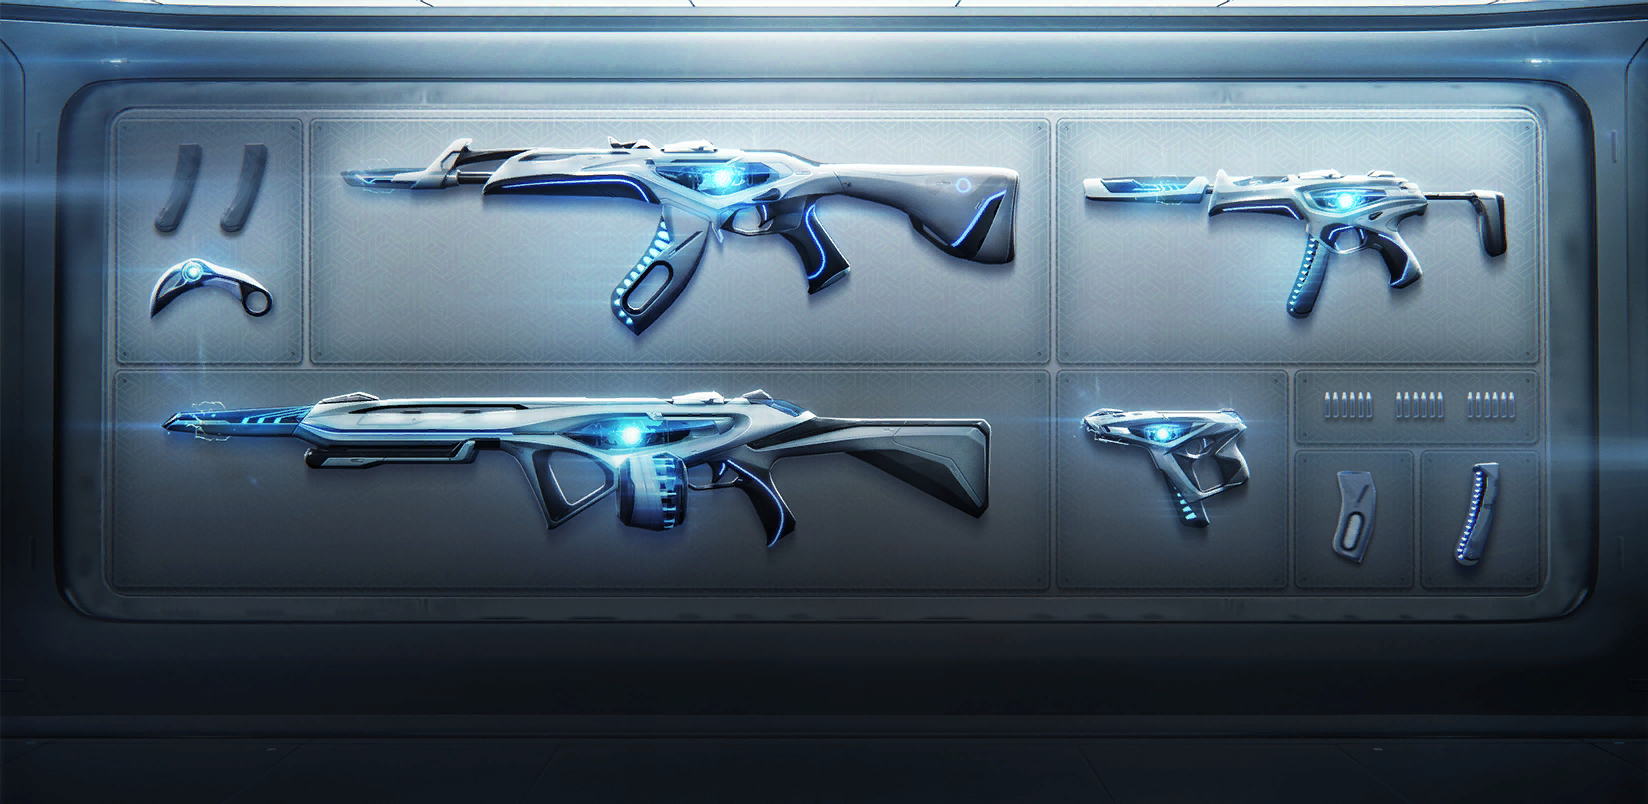 Prime//2.0 Collection - Valorant Item Store Skins and News